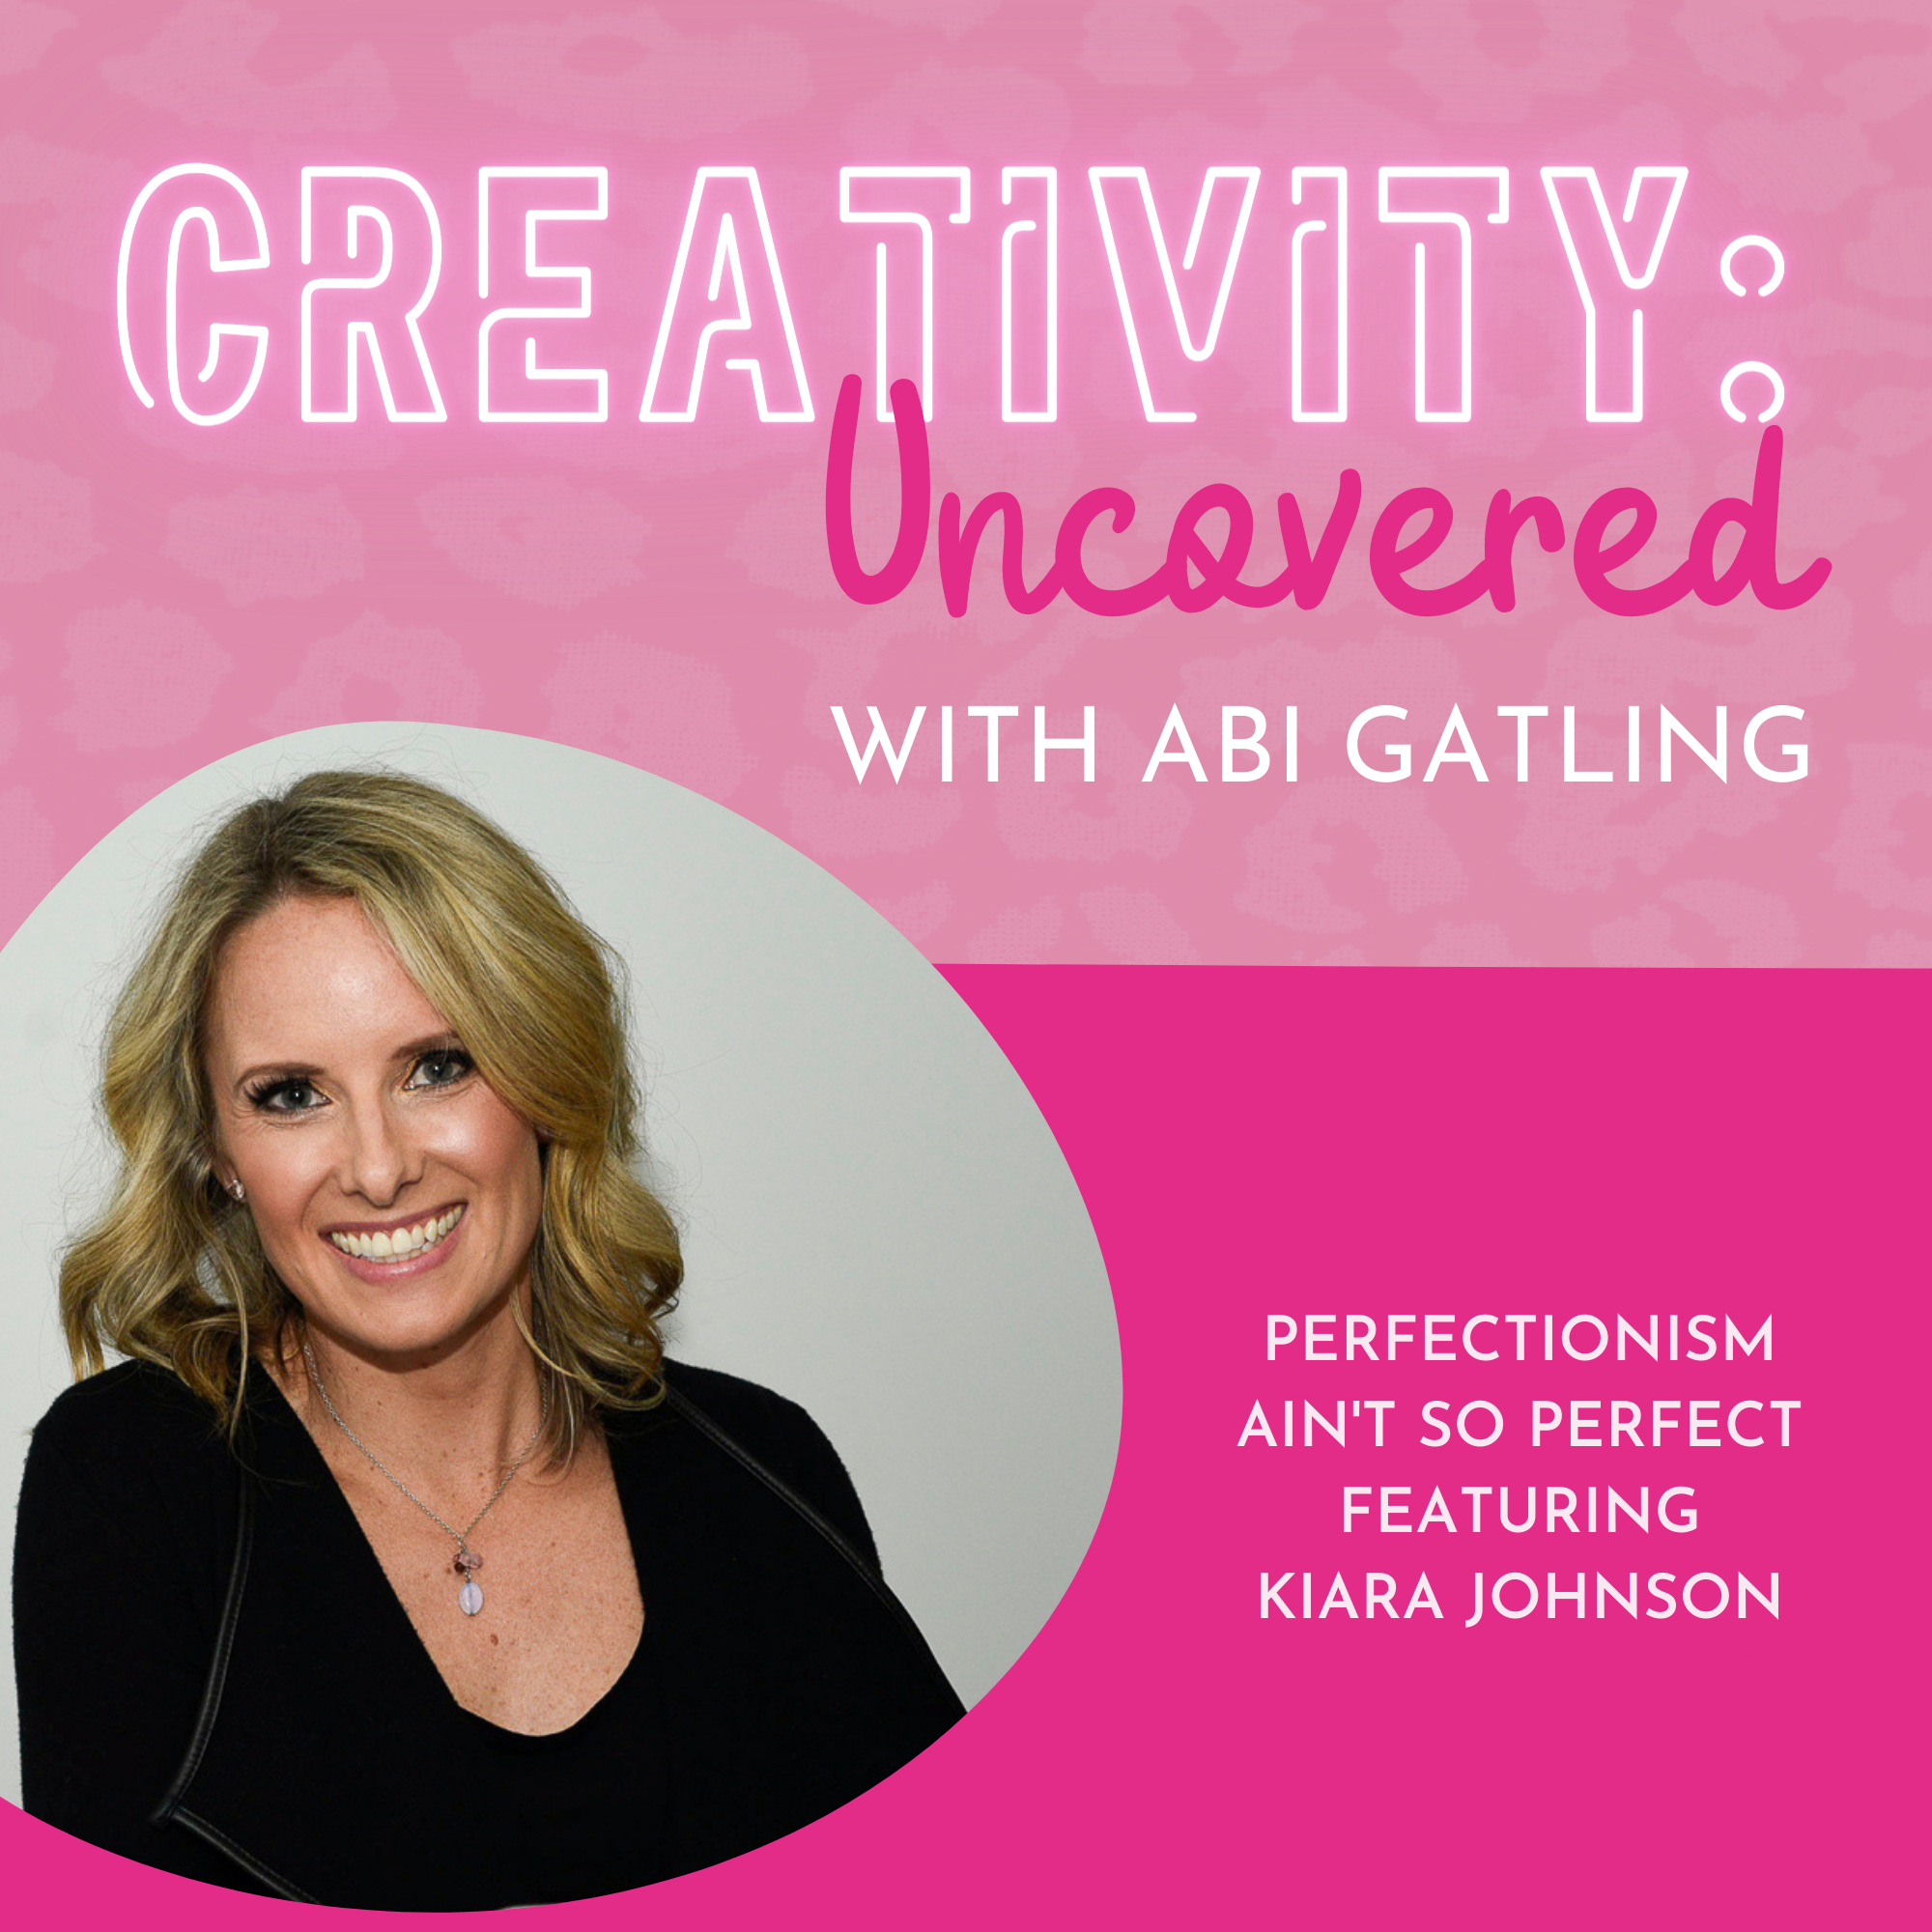 Creativity: Uncovered podcast episode graphic featuring guest Kiara Johnson